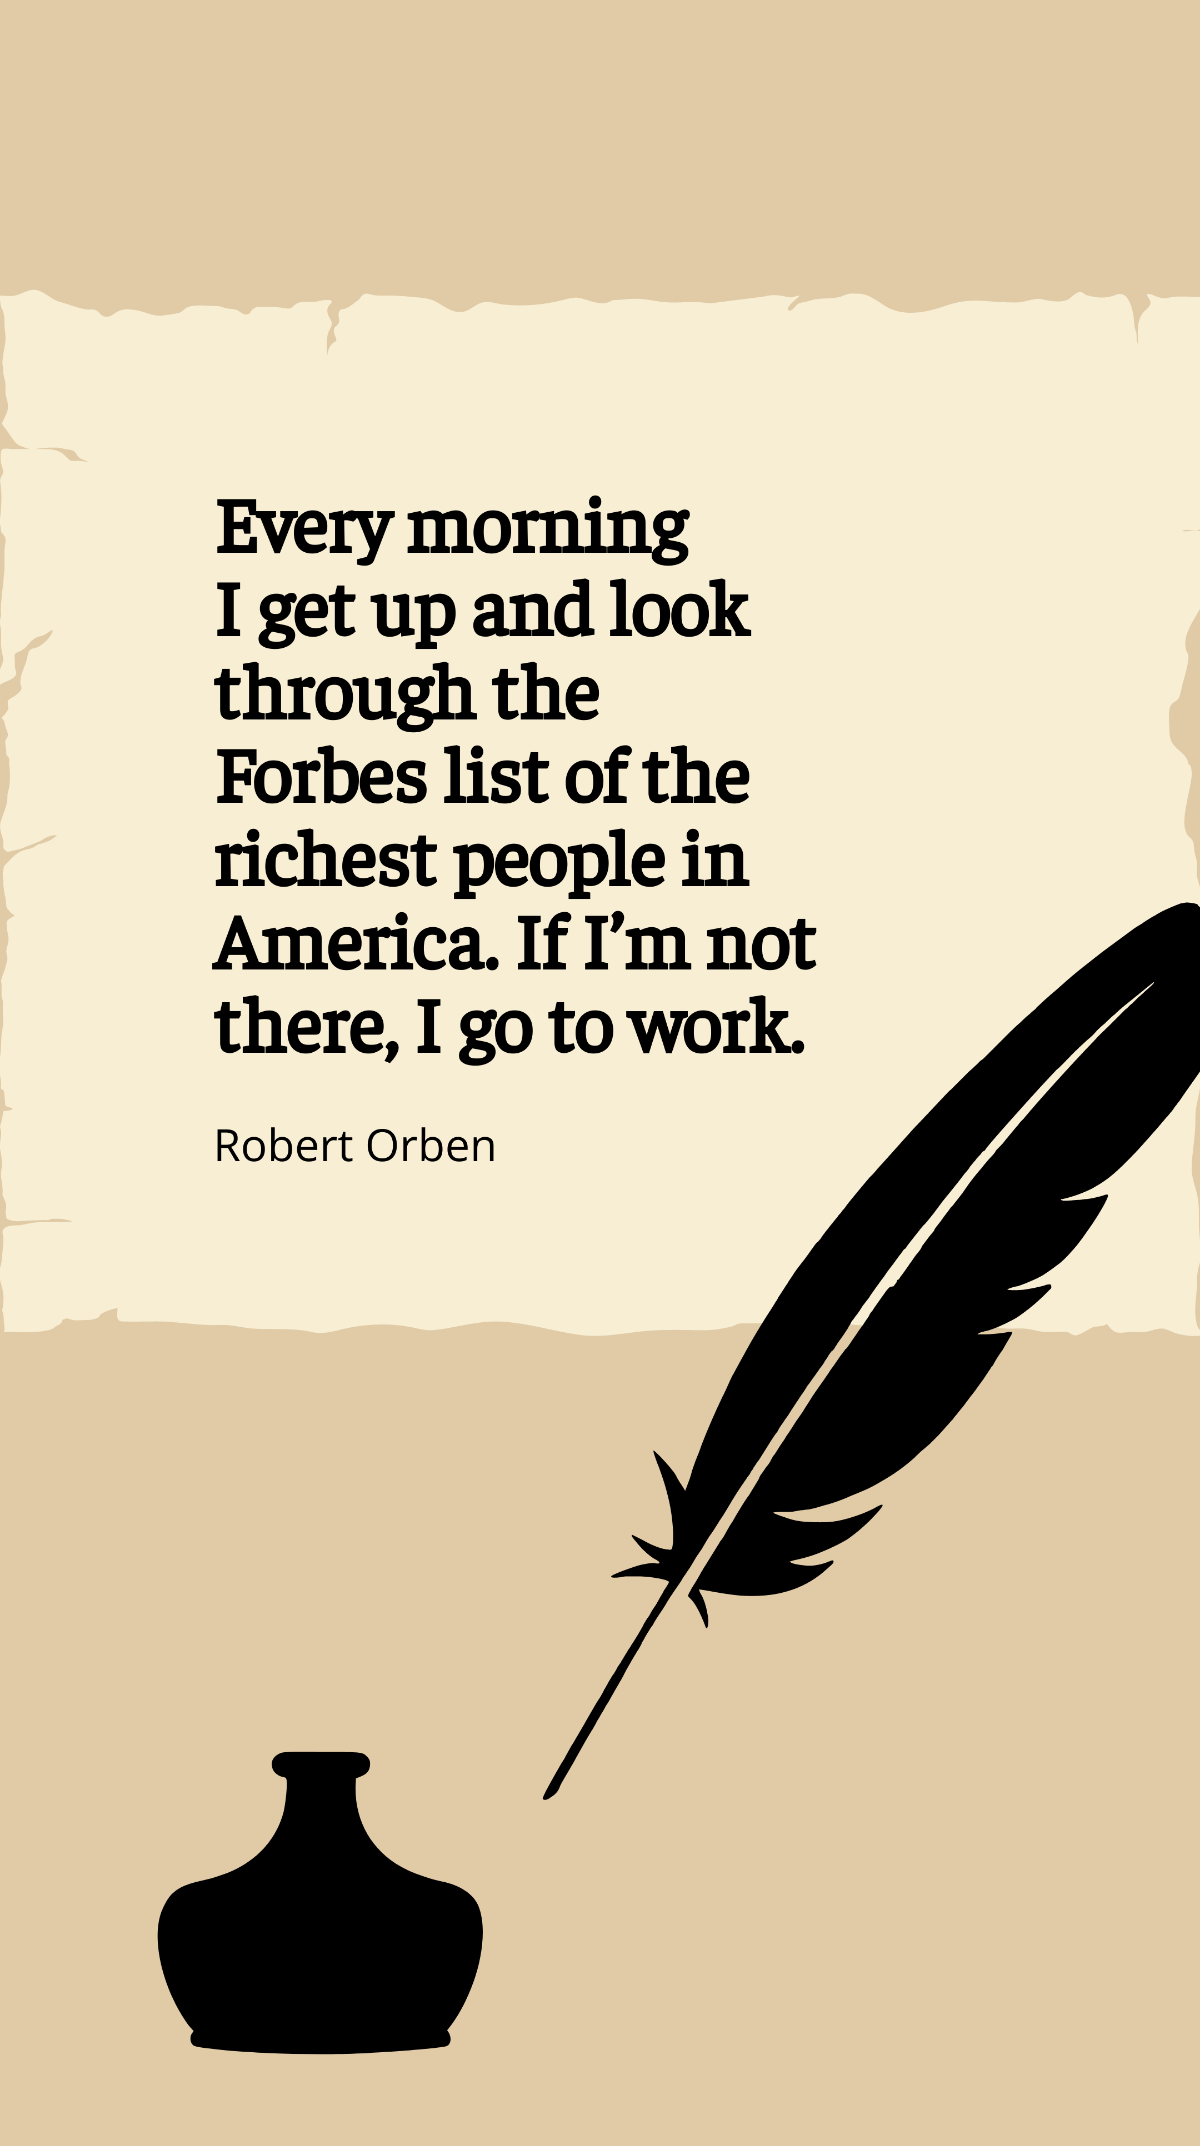 Robert Orben - Every morning I get up and look through the Forbes list of the richest people in America. If I’m not there, I go to work. Template